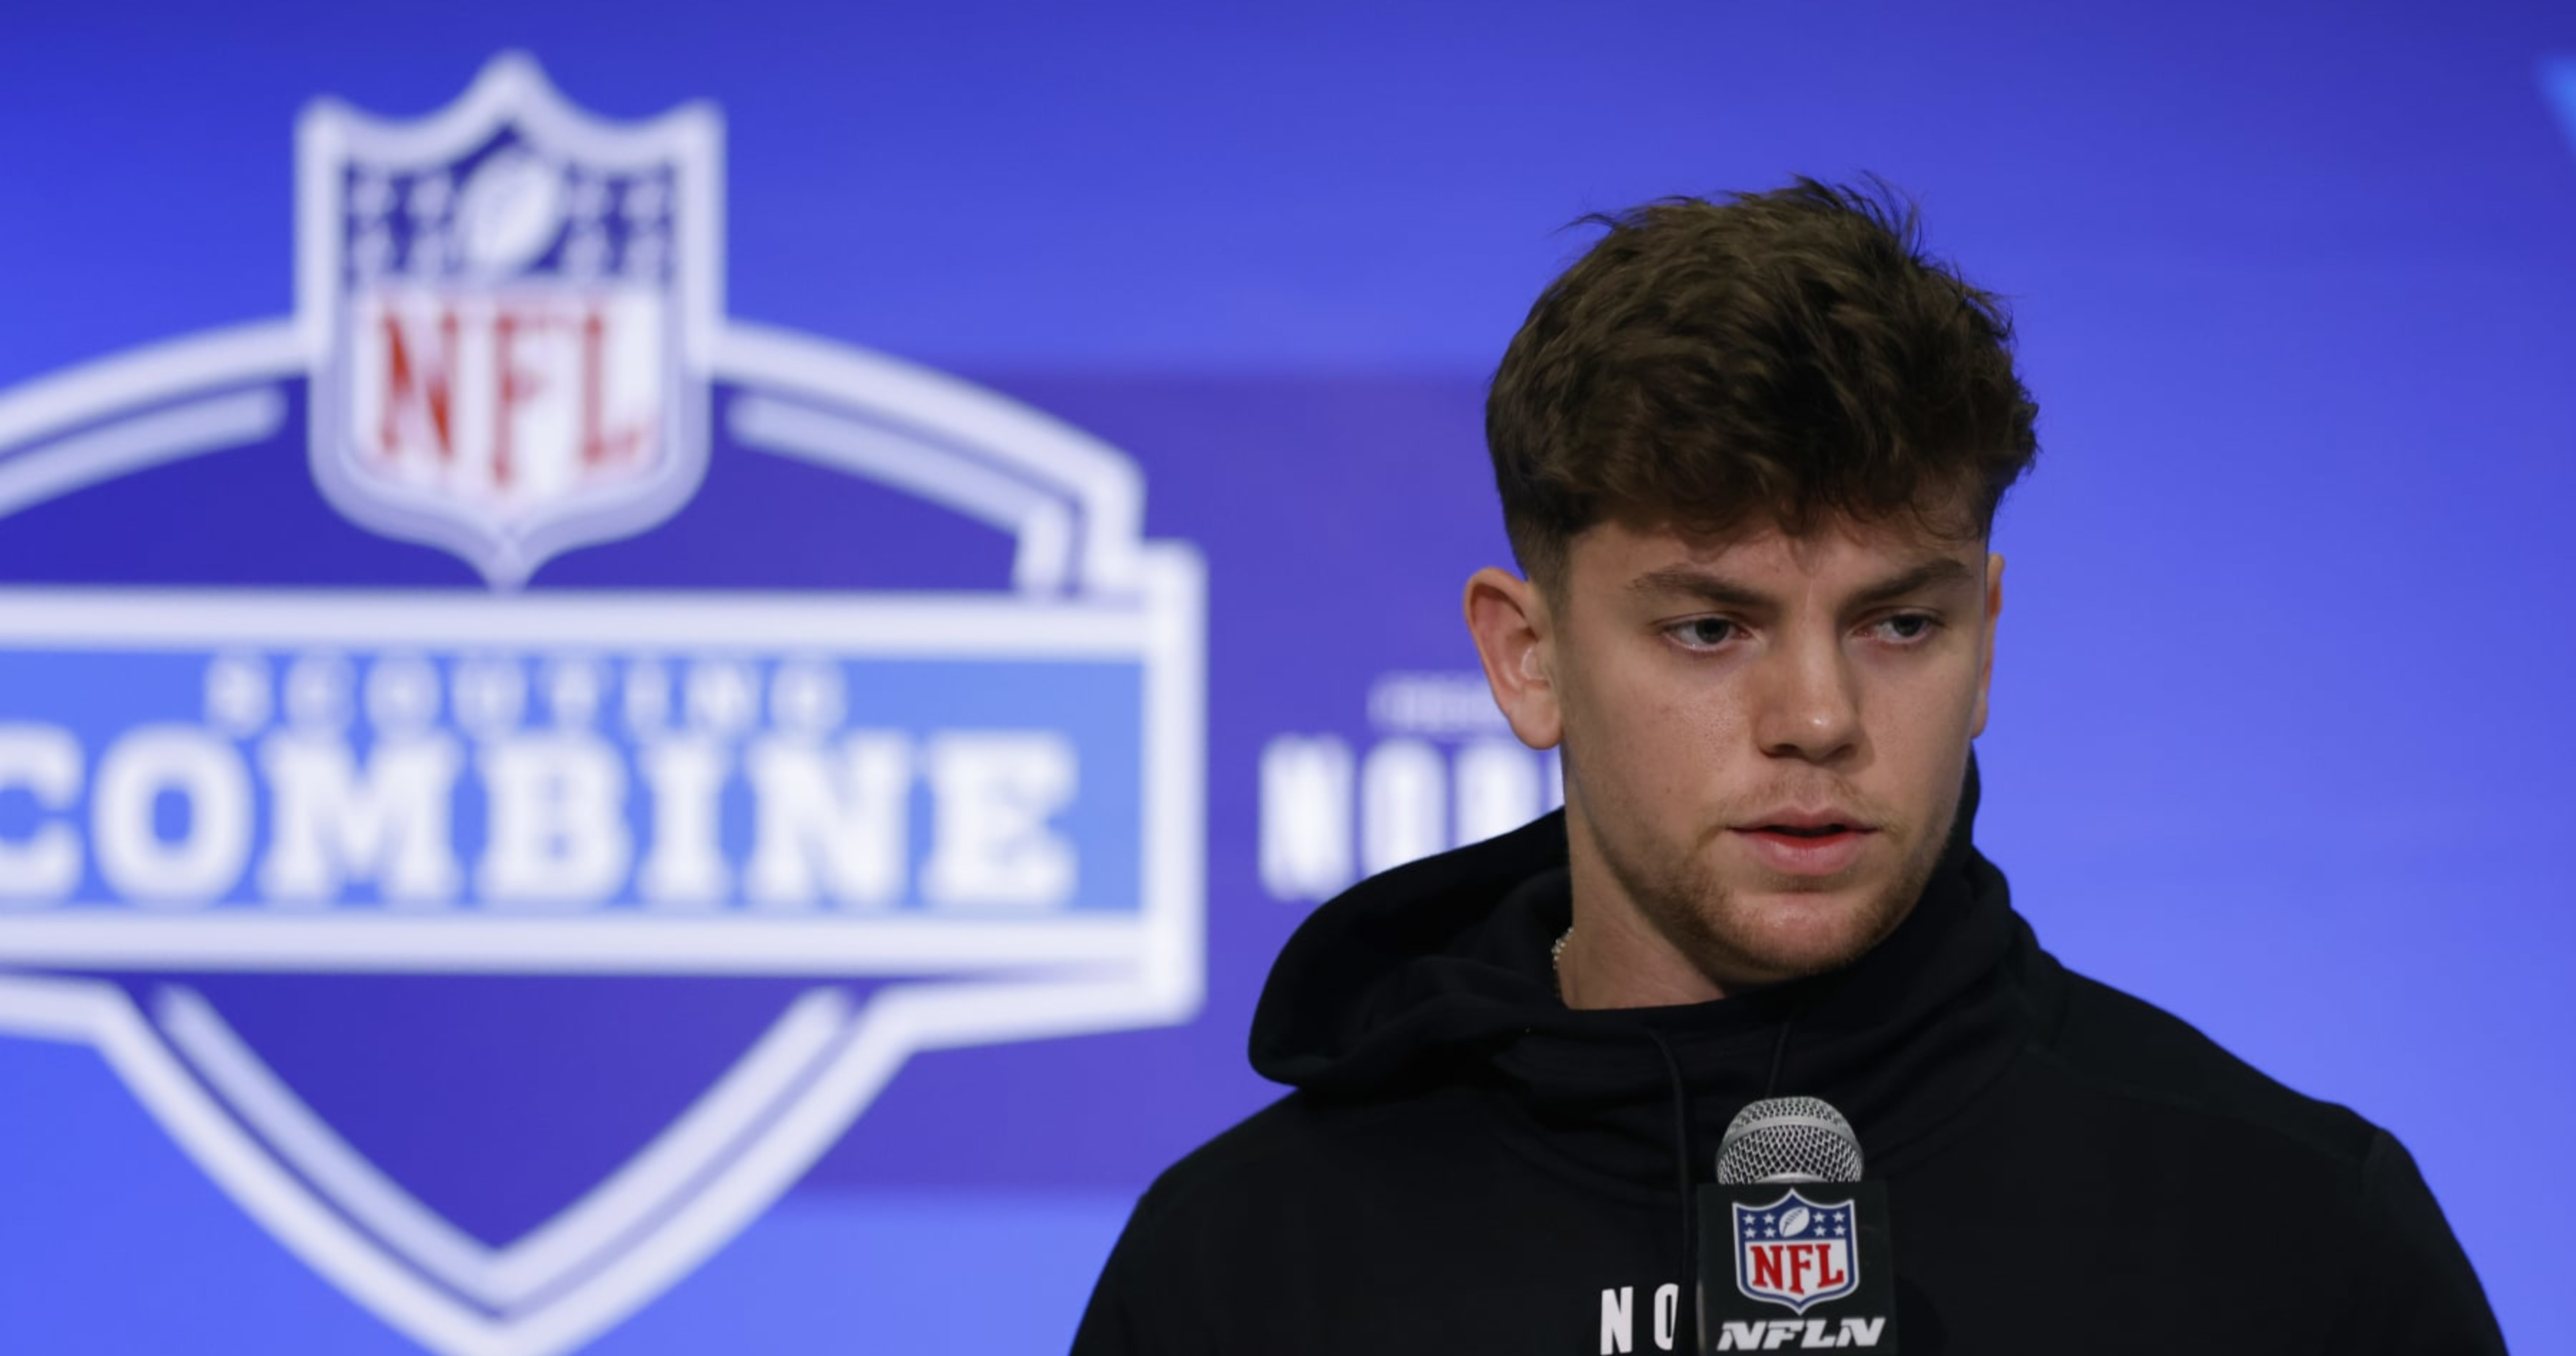 NFL Rumors: Eagles Feel Cooper DeJean Can 'Do It All' amid Questions about Position